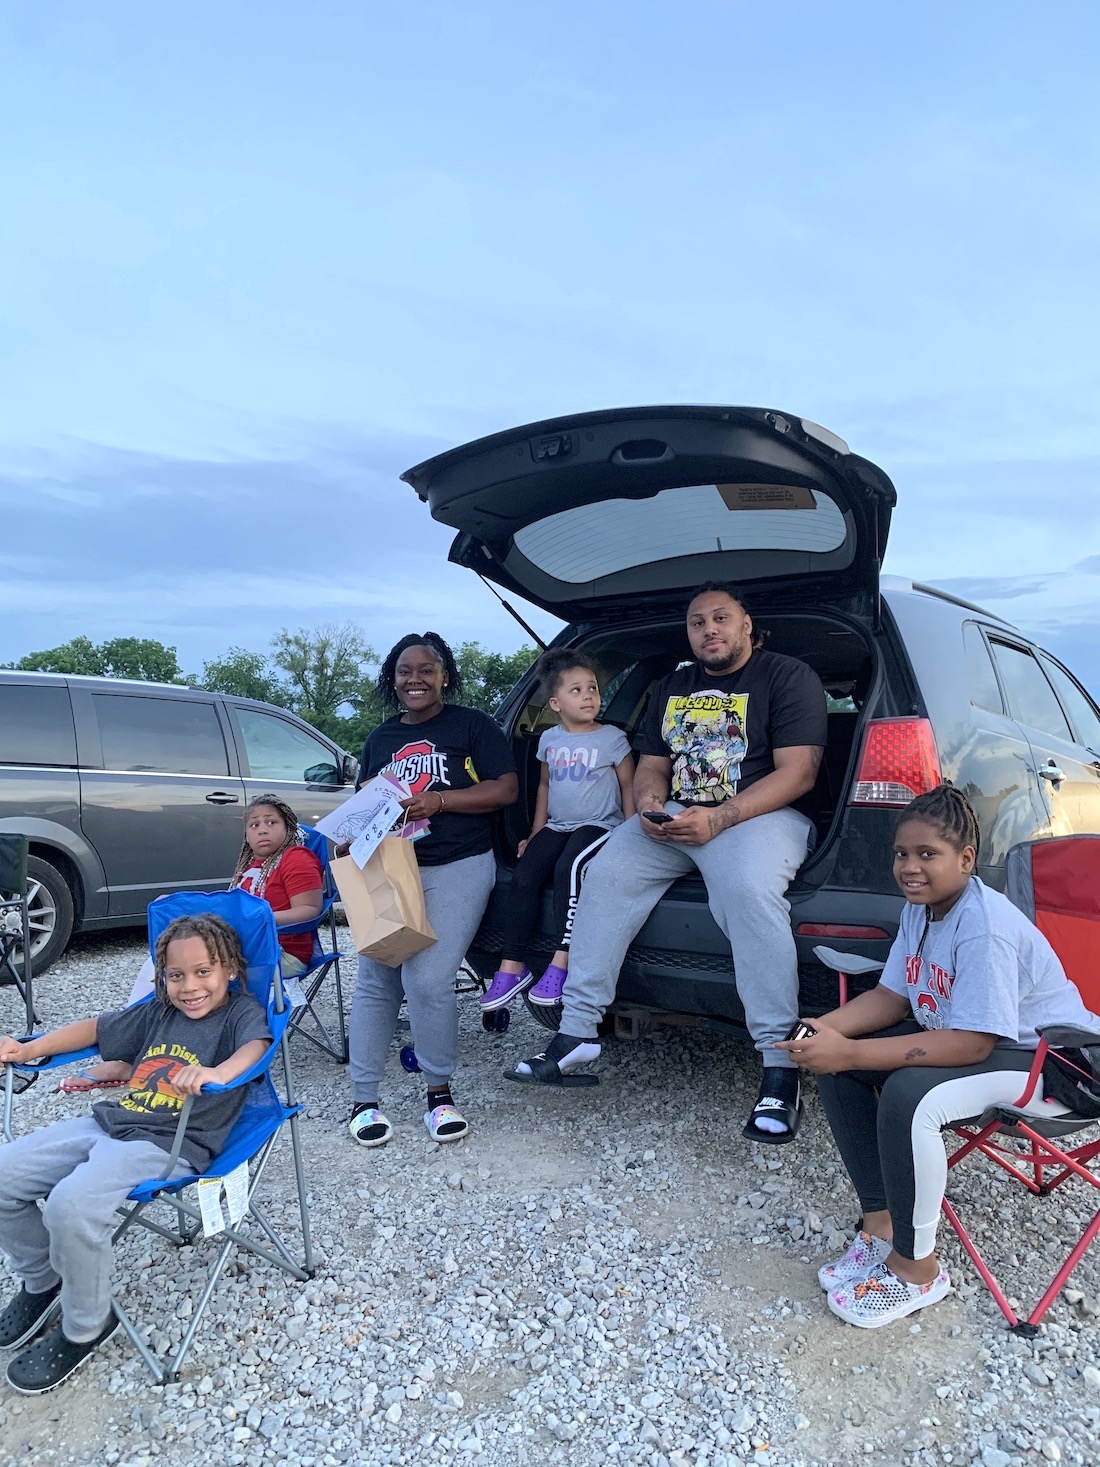 A family of two parents and three young kids sitting in the open back of a van at the drive-in